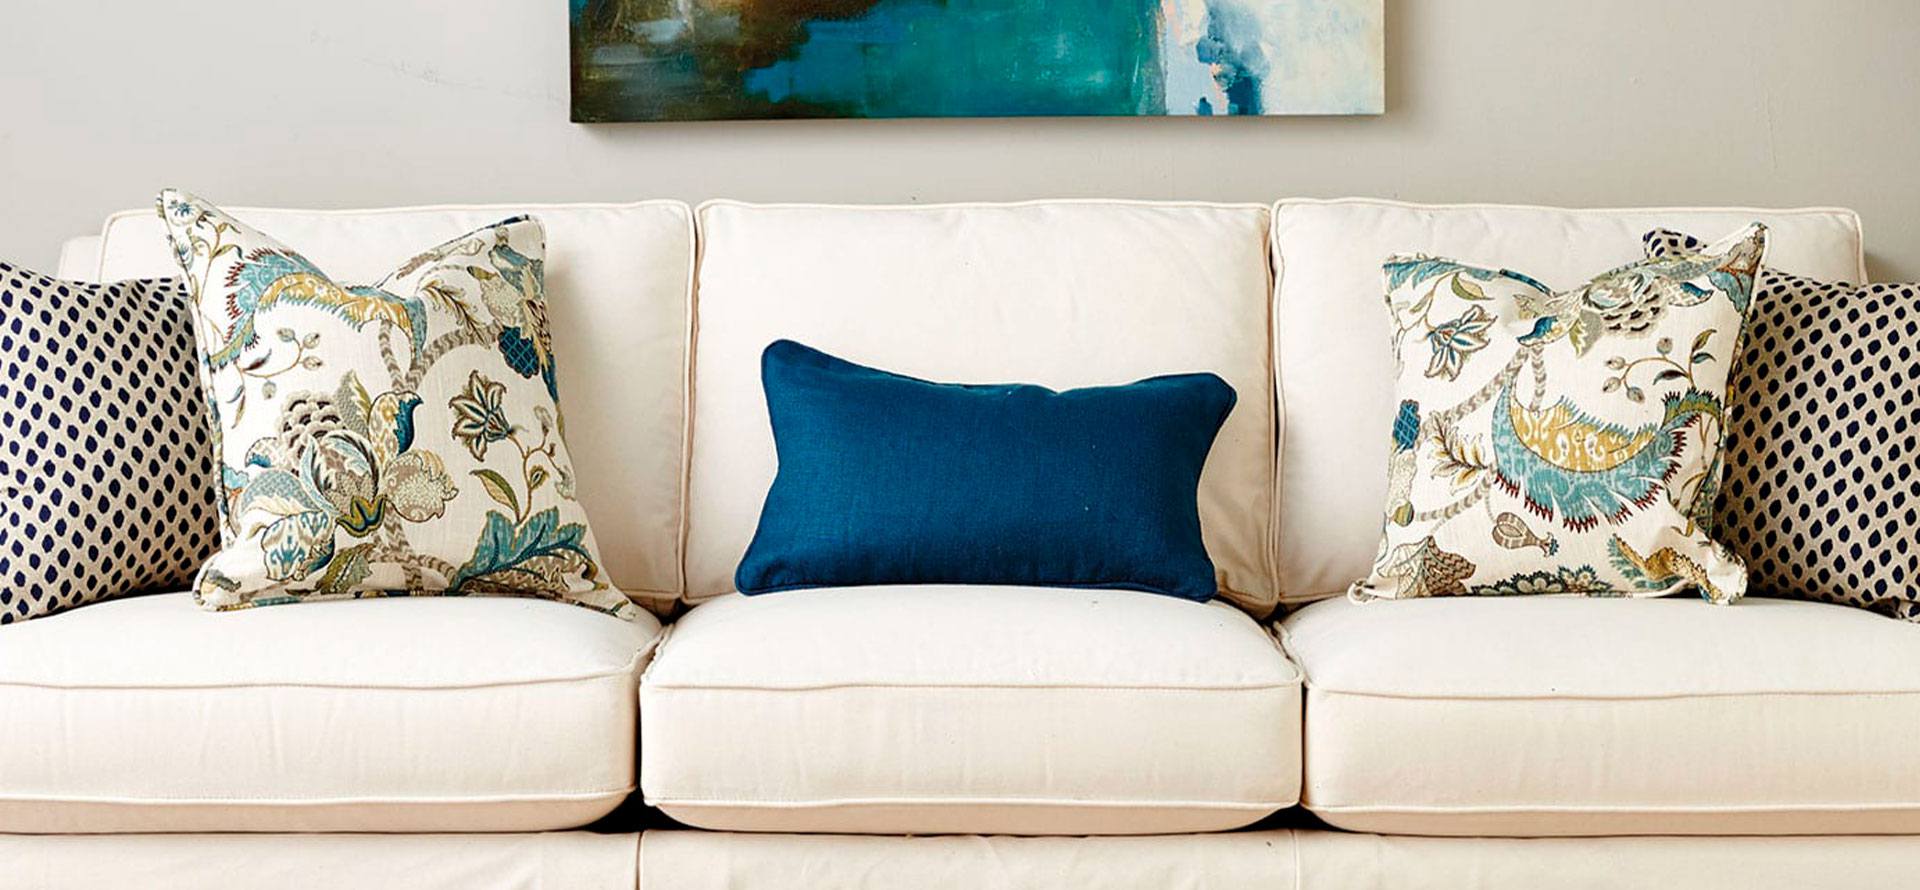 Throw pillows on couch in the room.